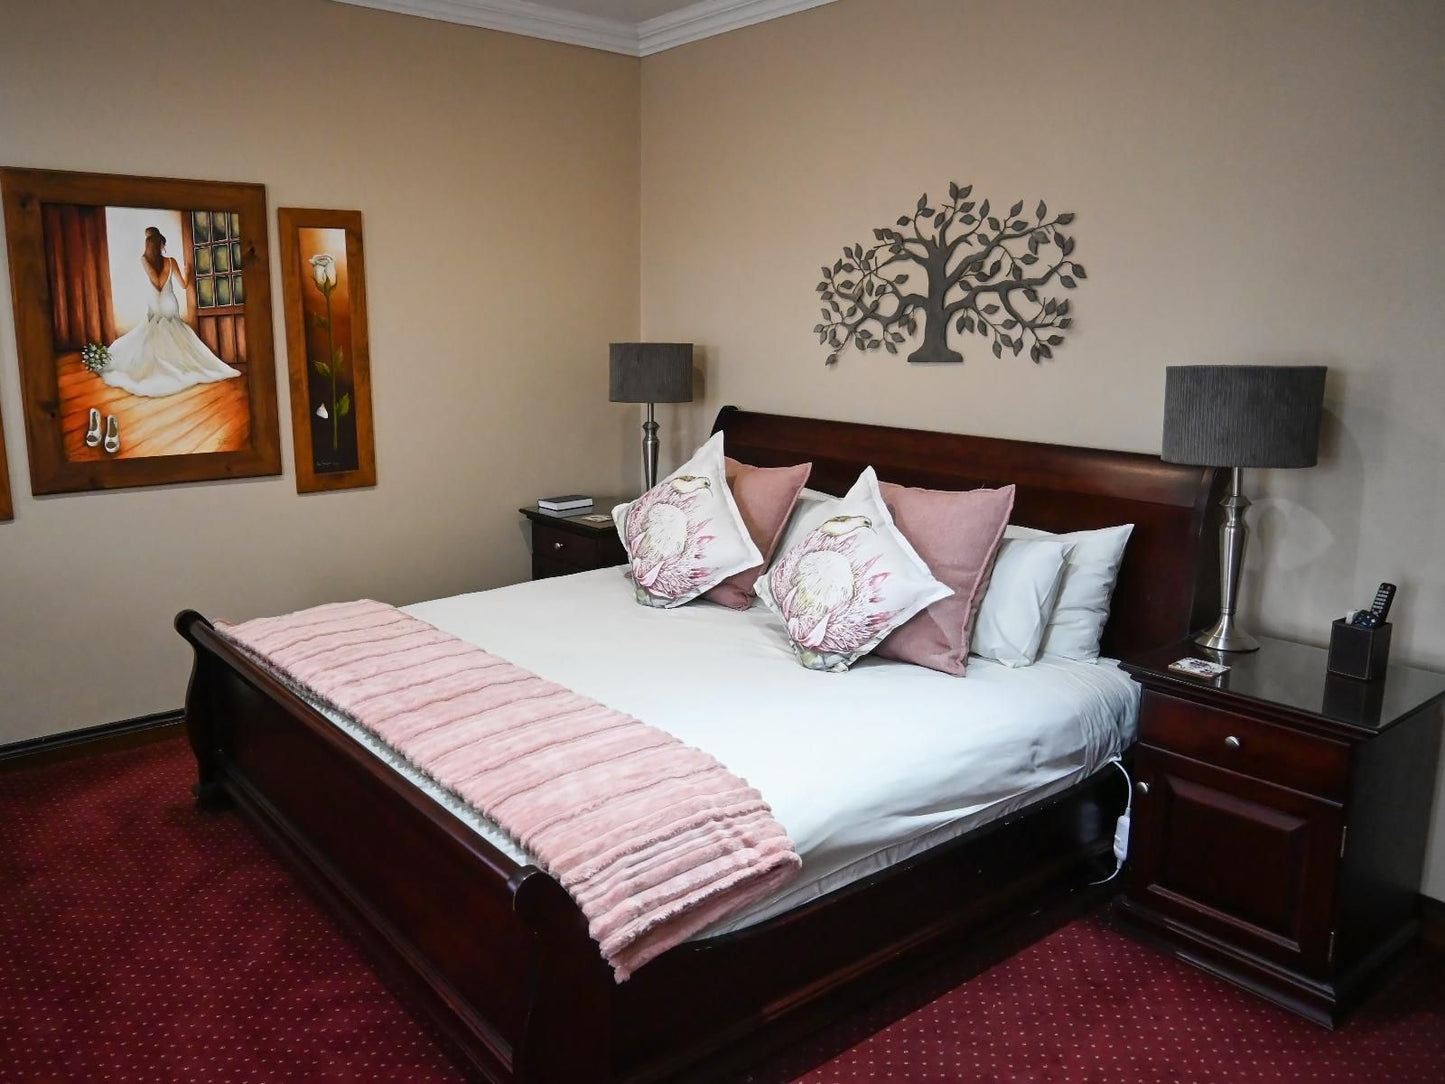 96 On Bree Guesthouse Heilbron Free State South Africa Bedroom